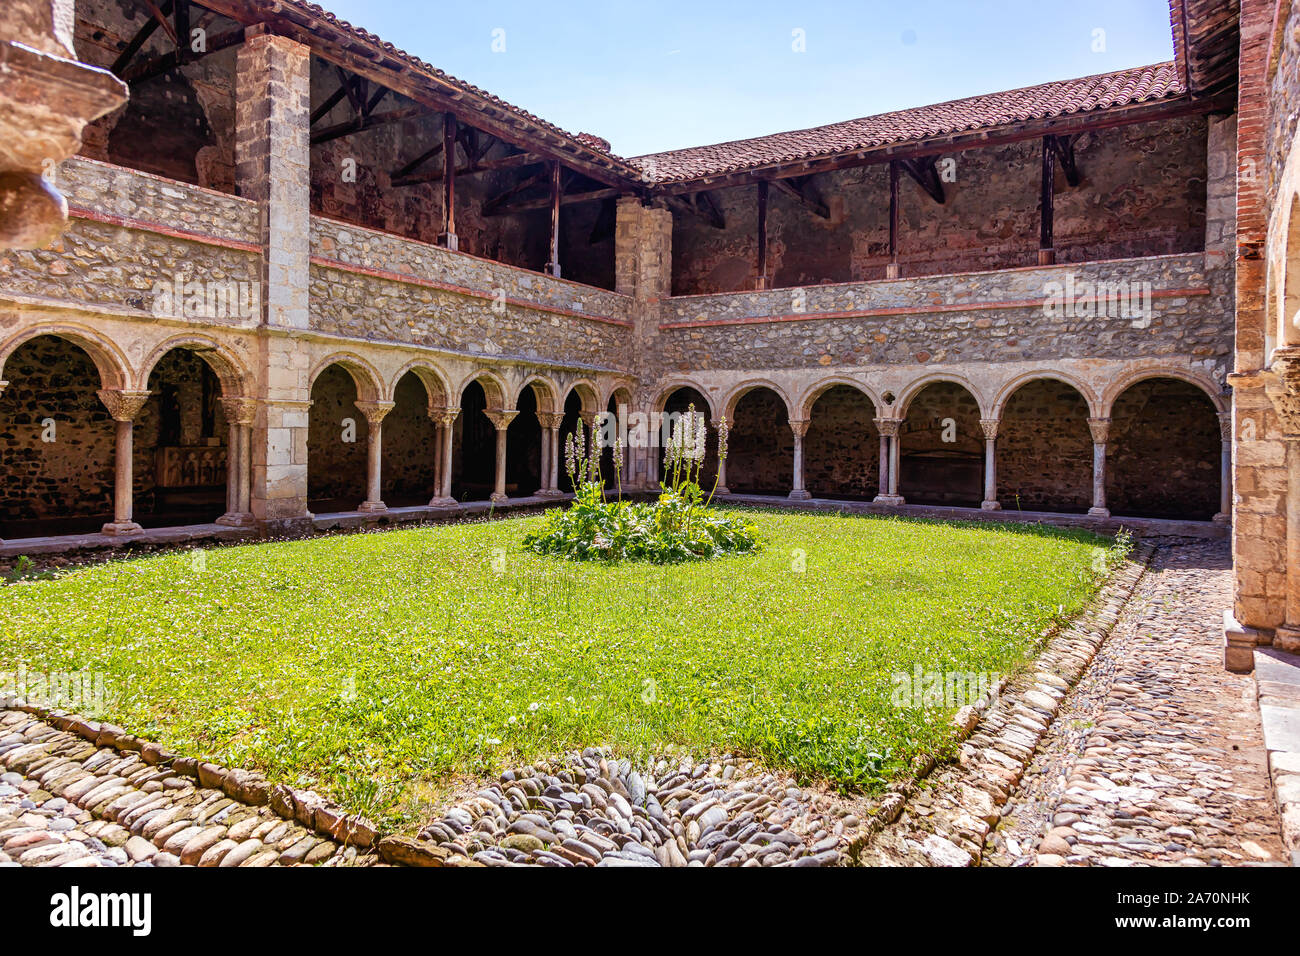 29 June 2019 Cloister of the Saint Lizier Cathedral, Ariège department, Pyrenees, Occitanie, France Stock Photo